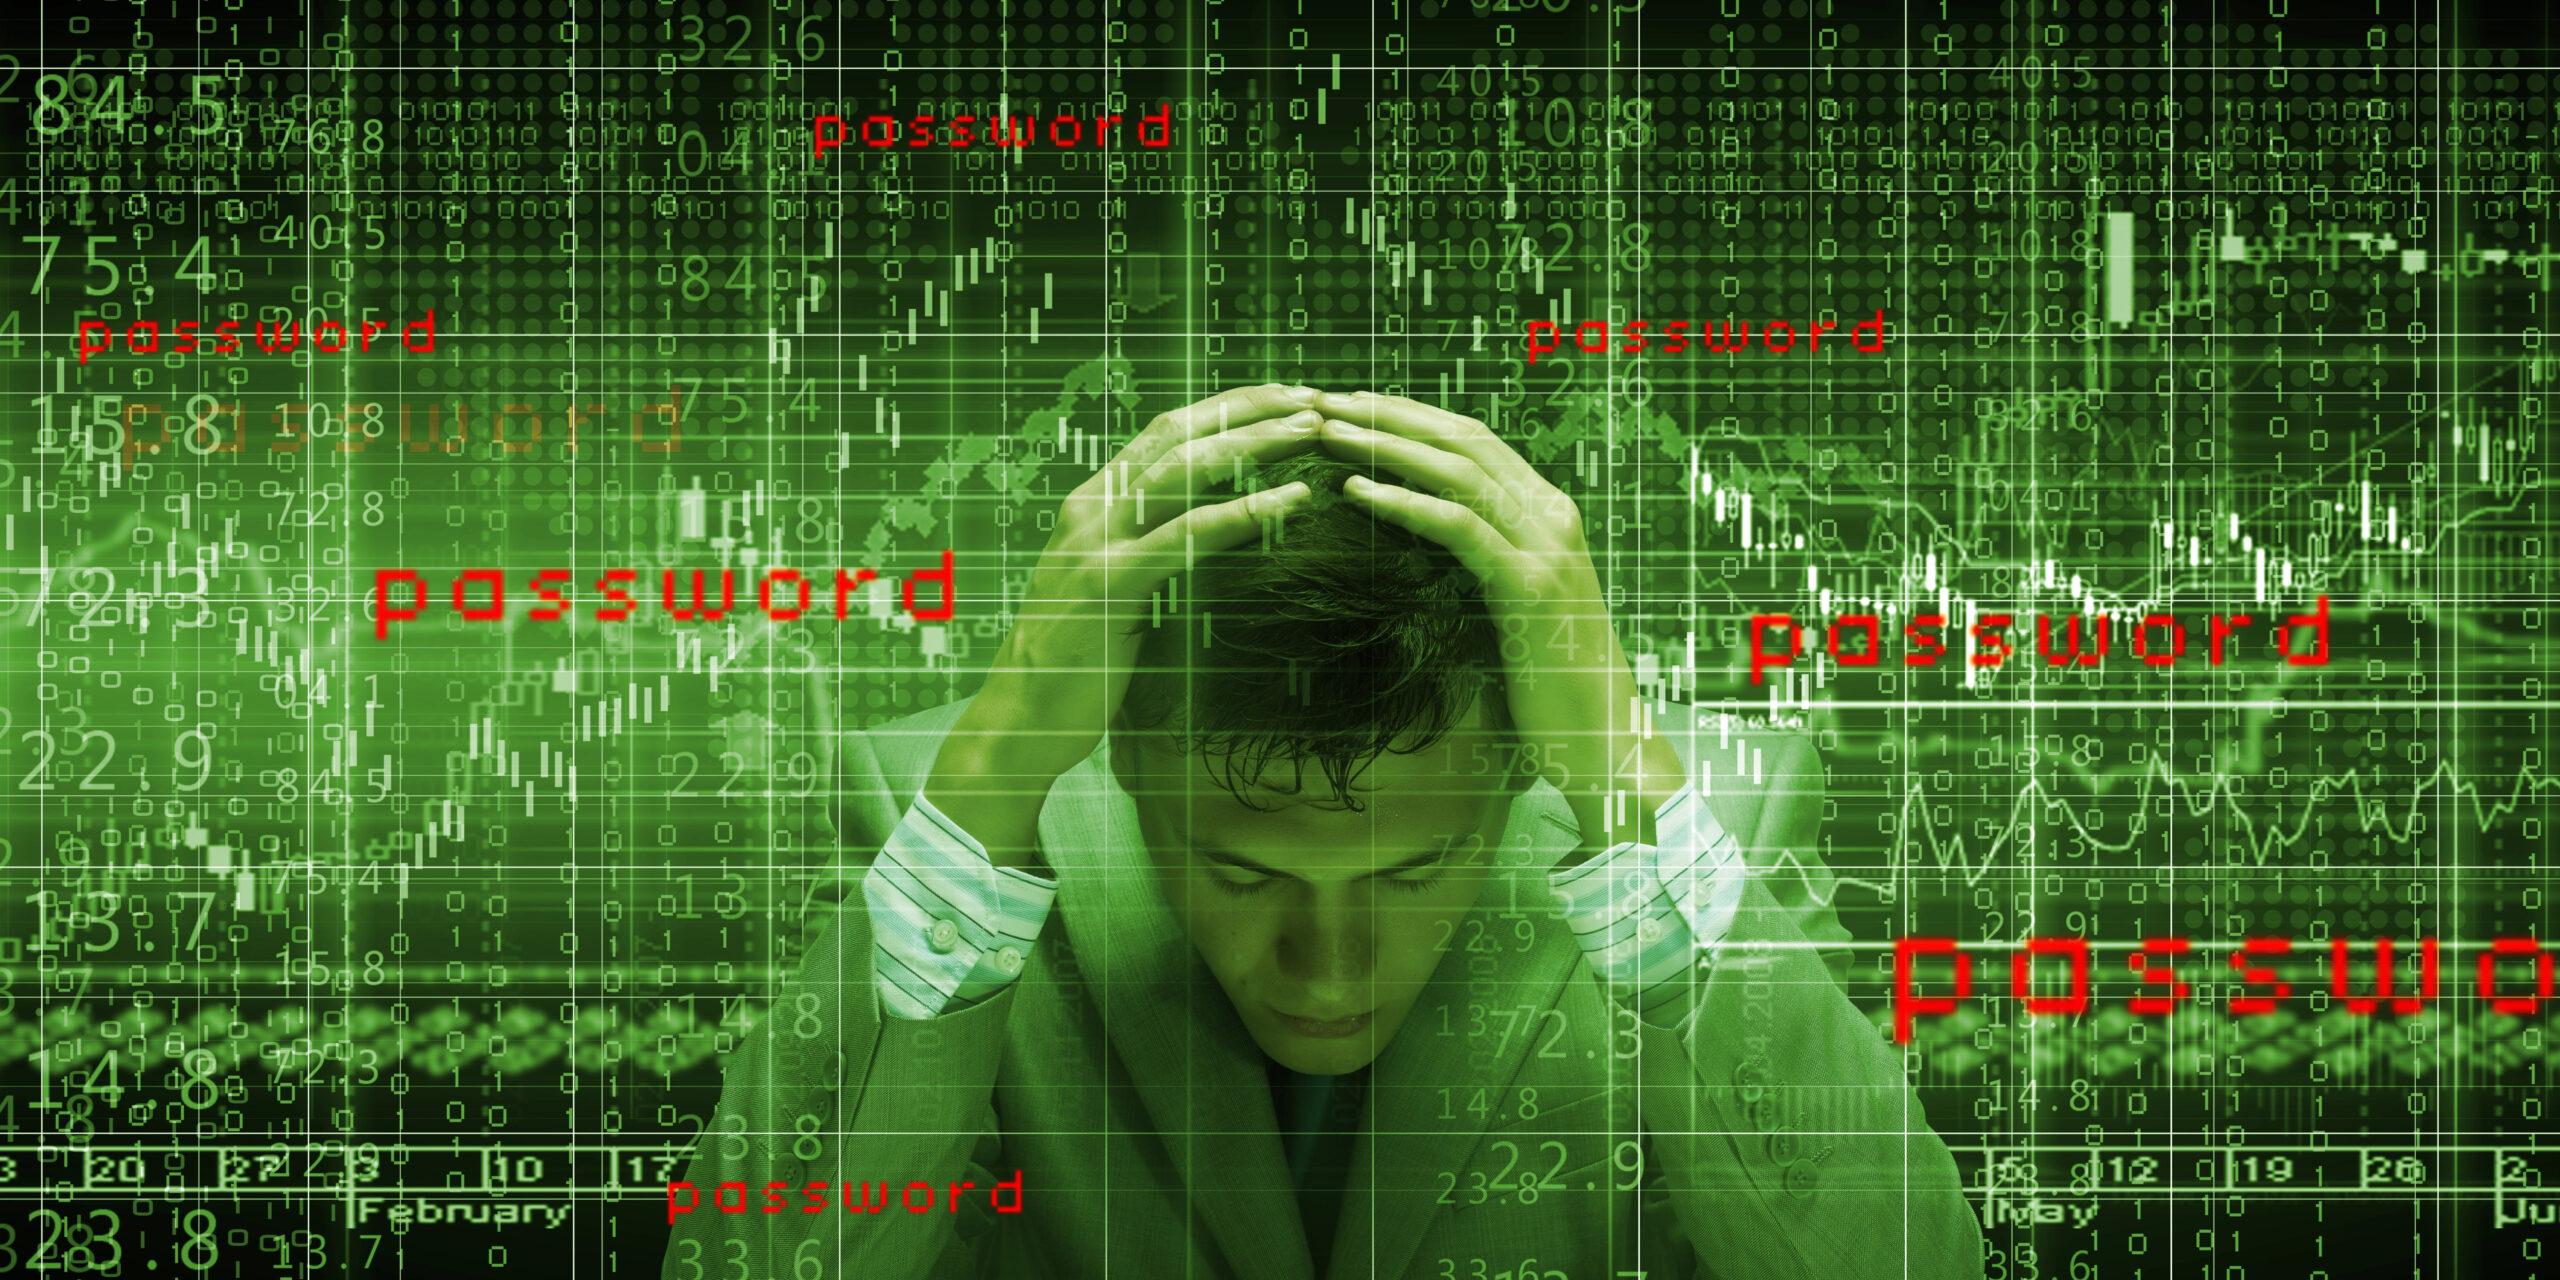 Featured image of a man overwhelmed by monitoring computer code.